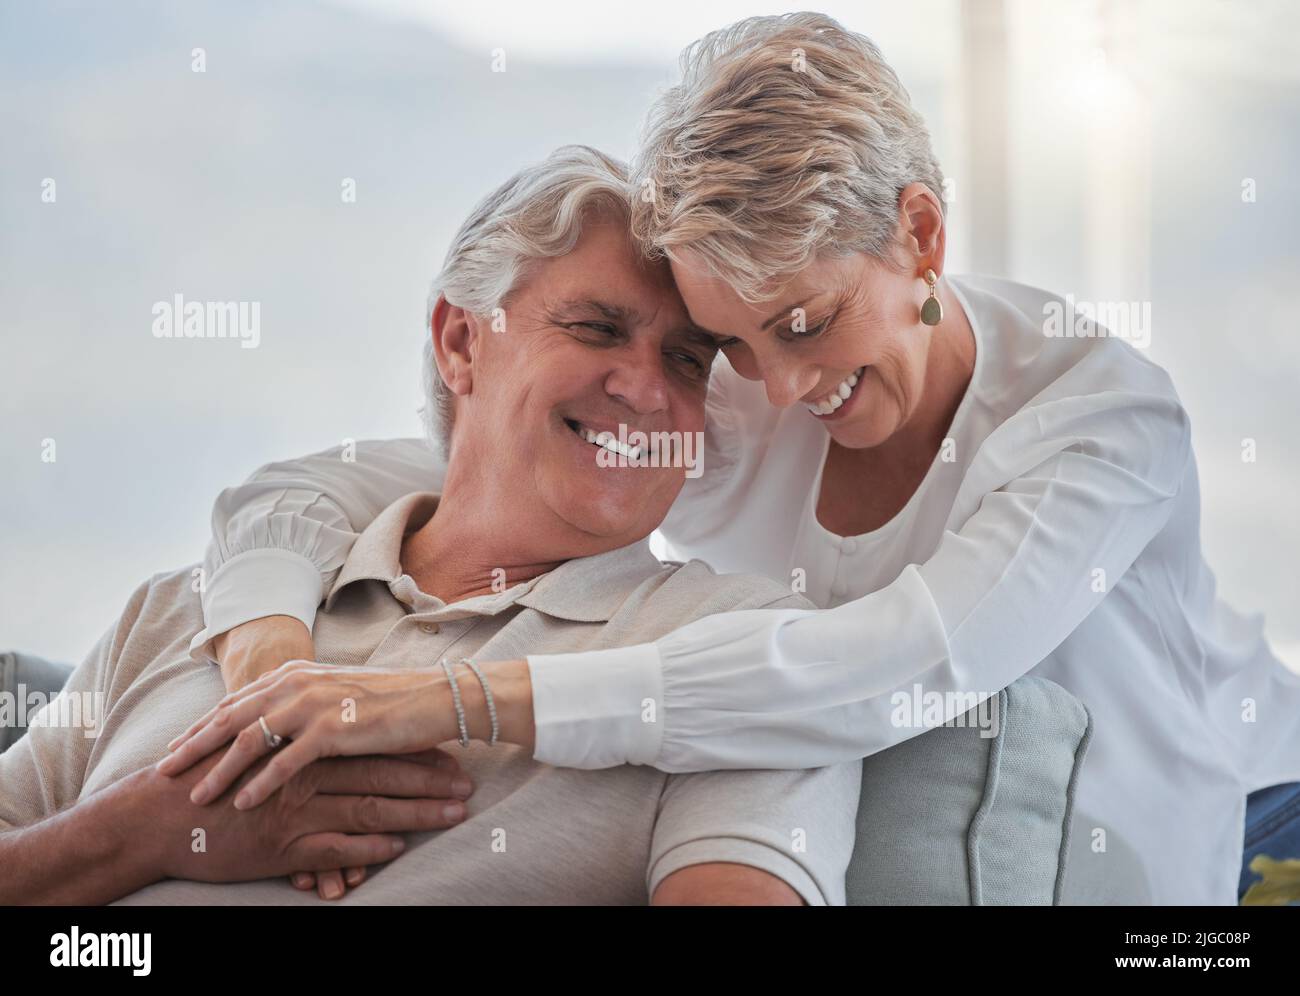 Loving each other more with each passing day. an affectionate senior couple relaxing in their living room at home. Stock Photo